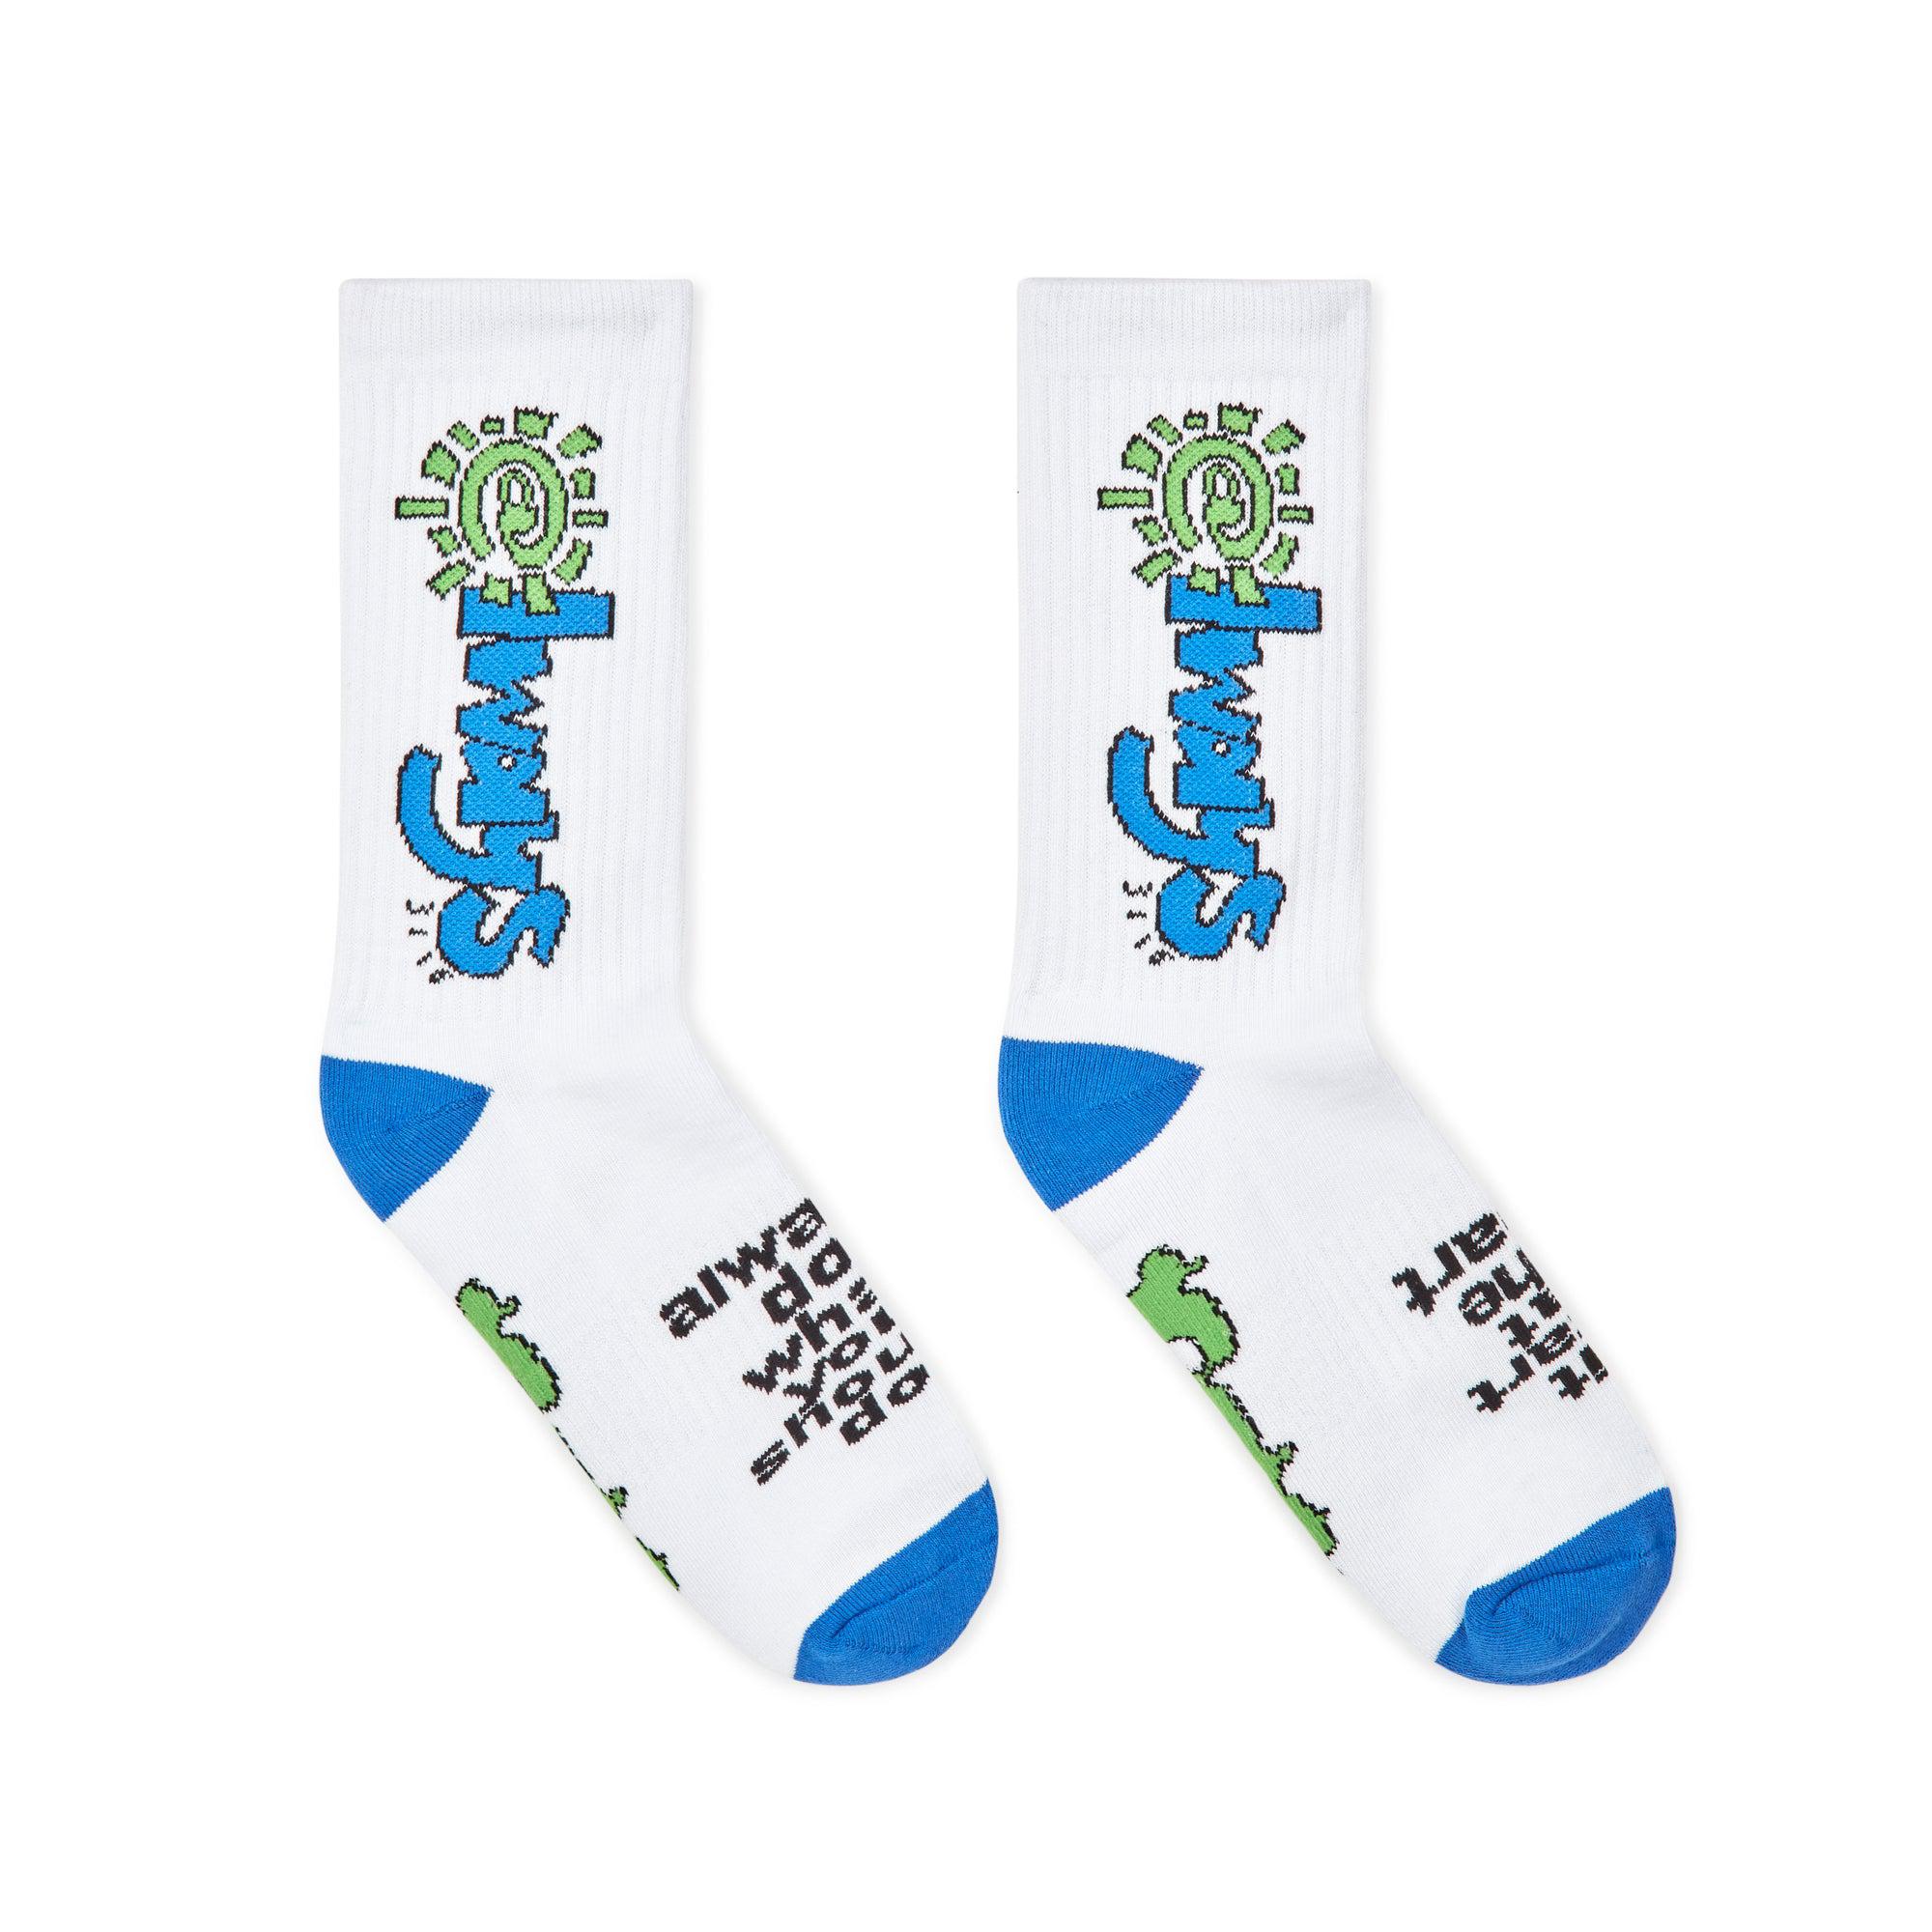 Always Do What You Should Do 3116 Sock (White) by ALWAYS DO WHAT YOU SHOULD DO